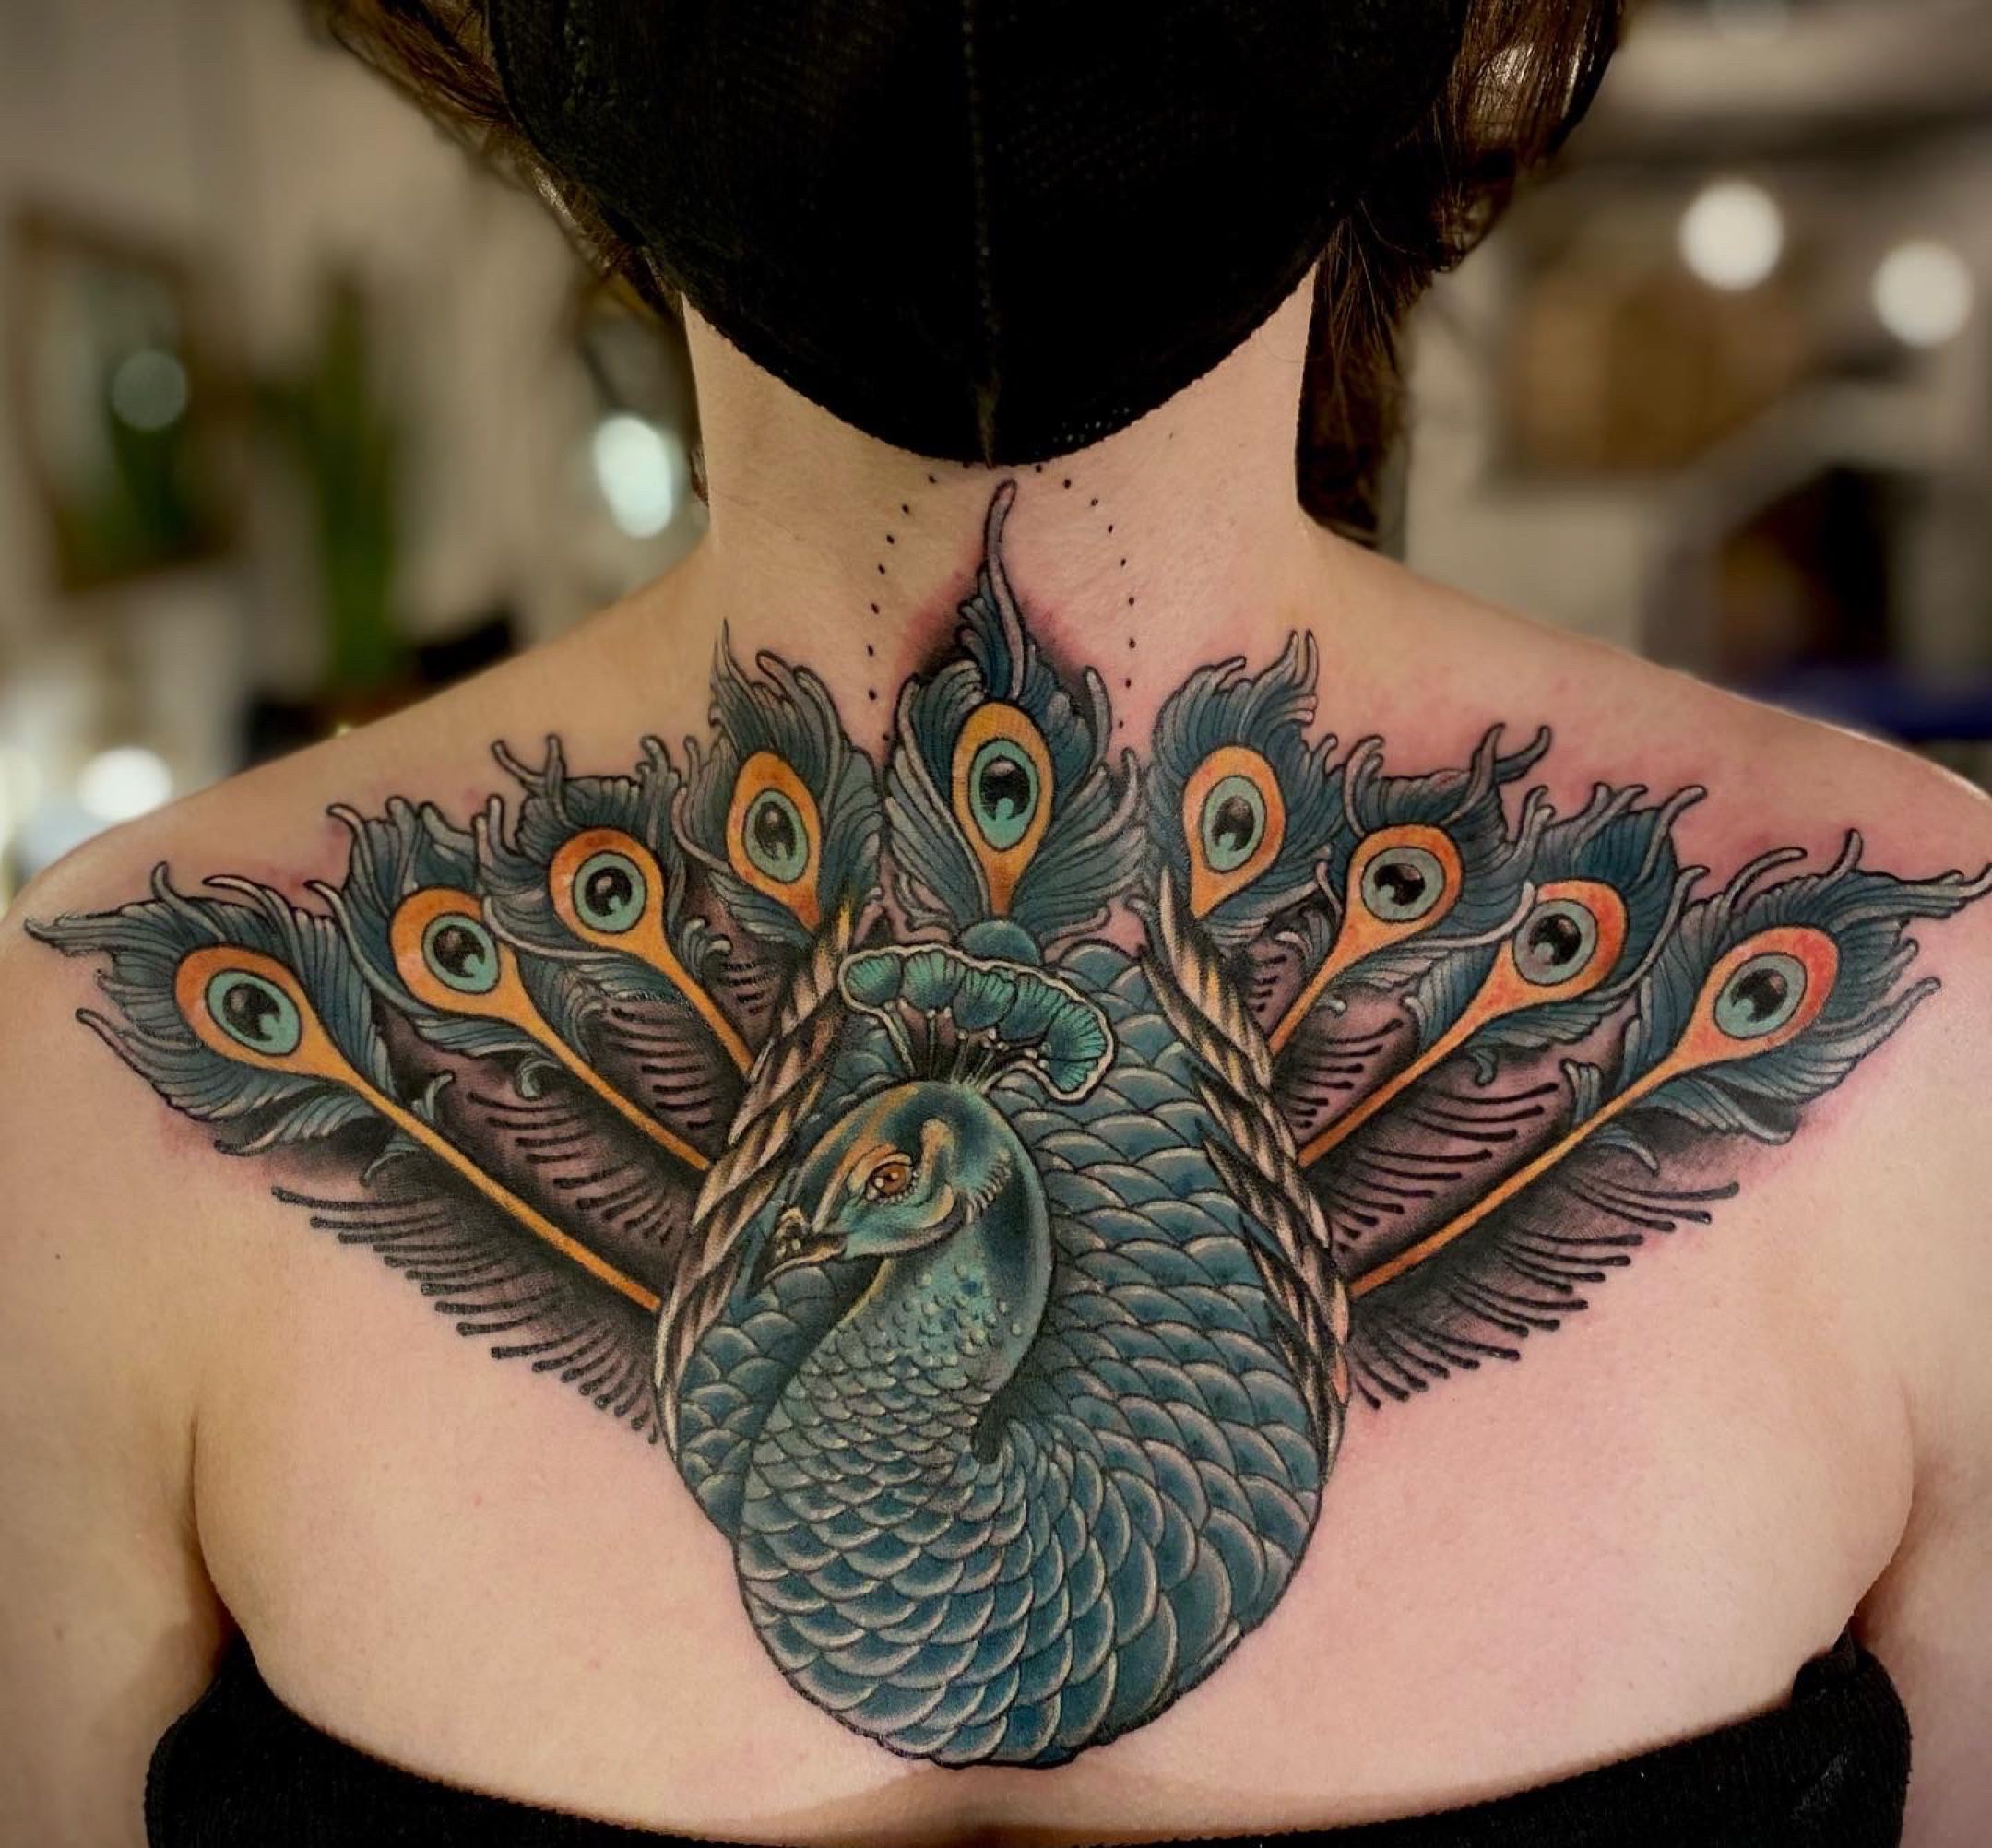 Peacock and Chrysanthemums Side Tattoo ideas for women :: Behance